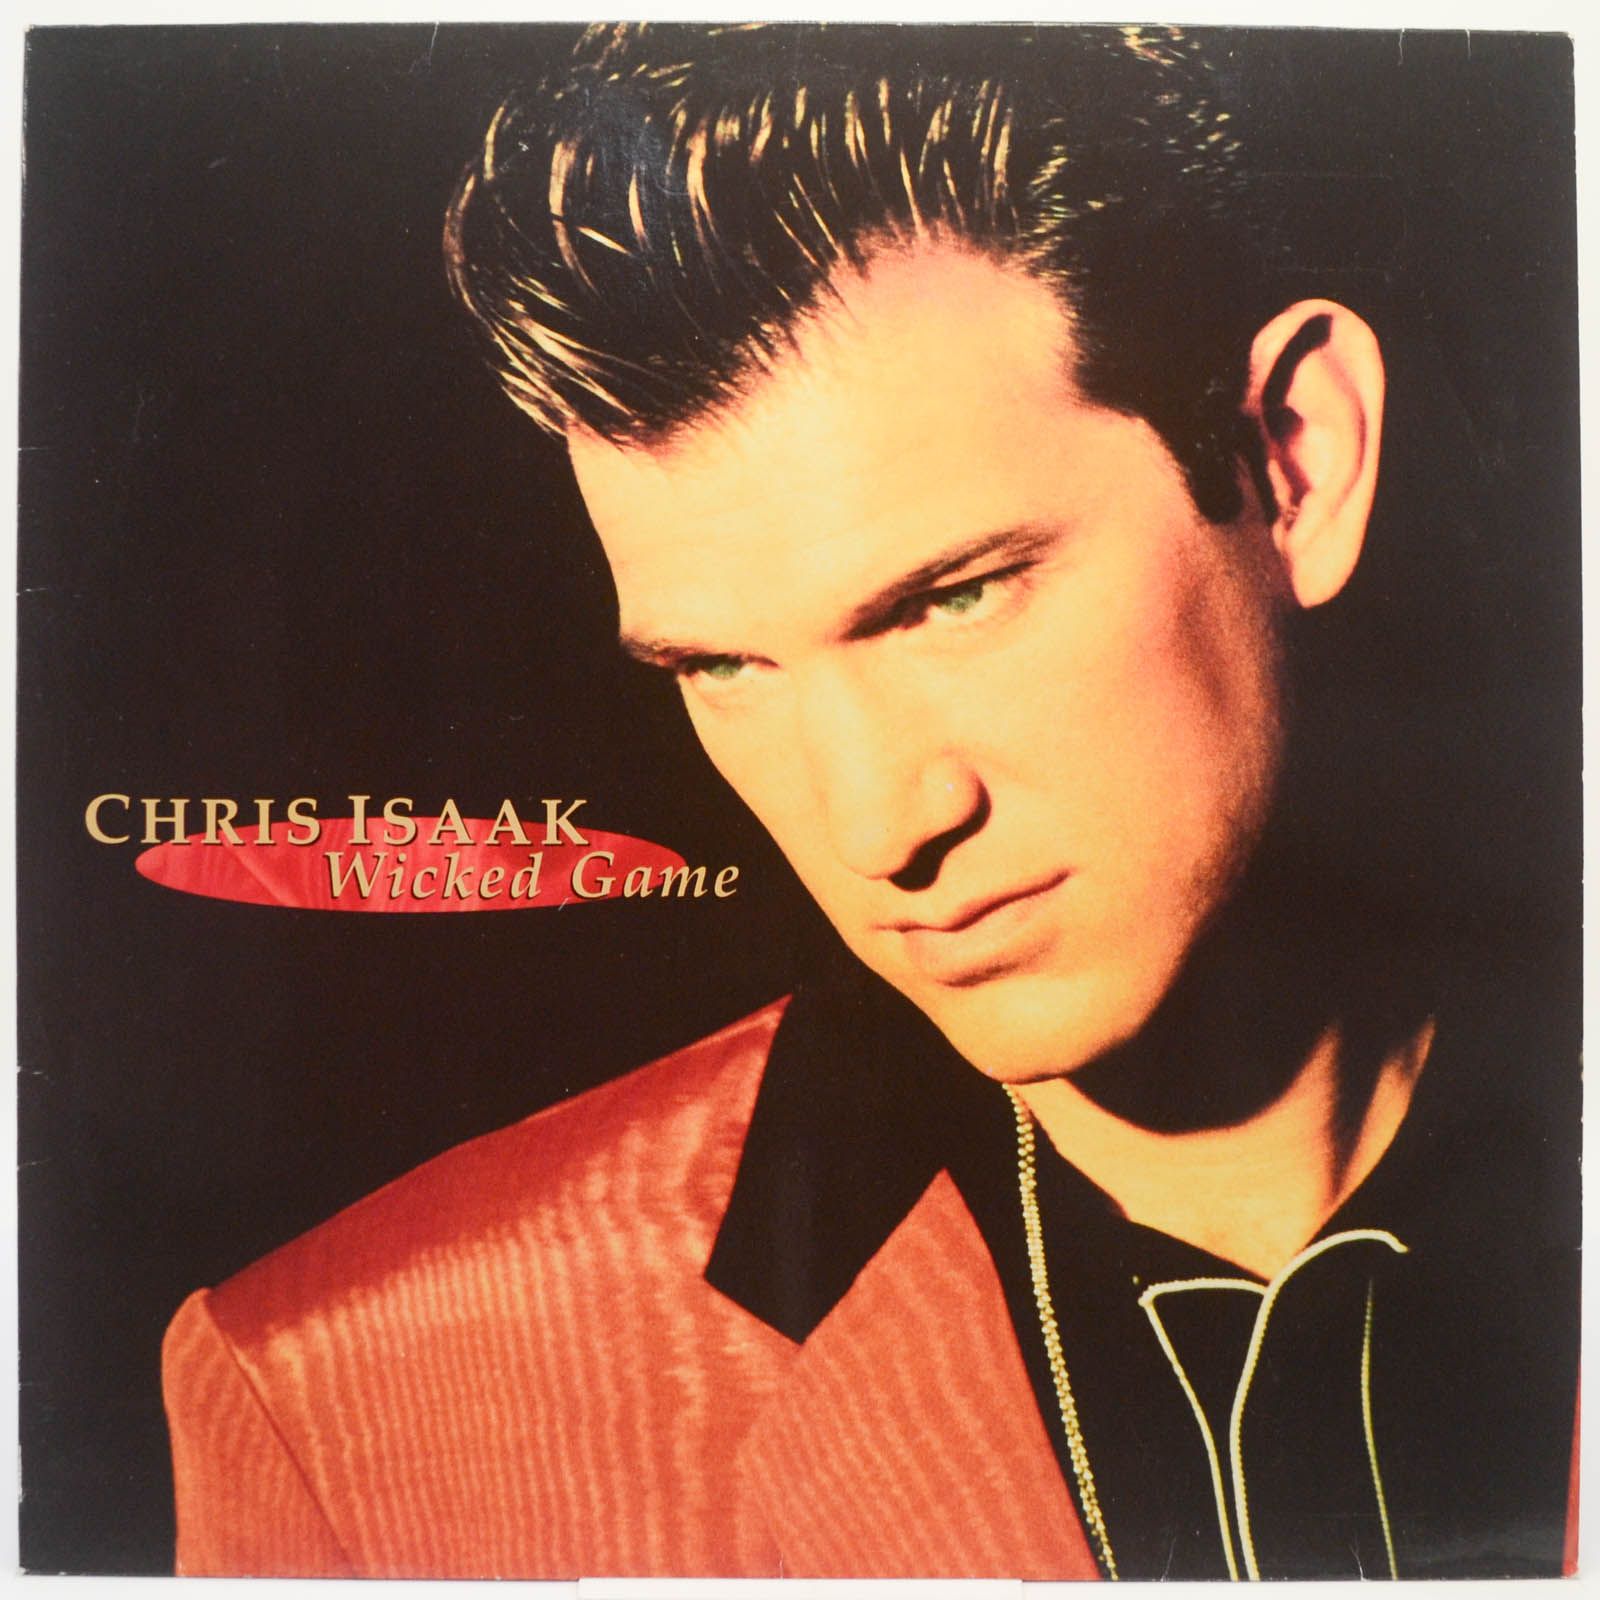 Chris Isaak — Wicked Game, 1991